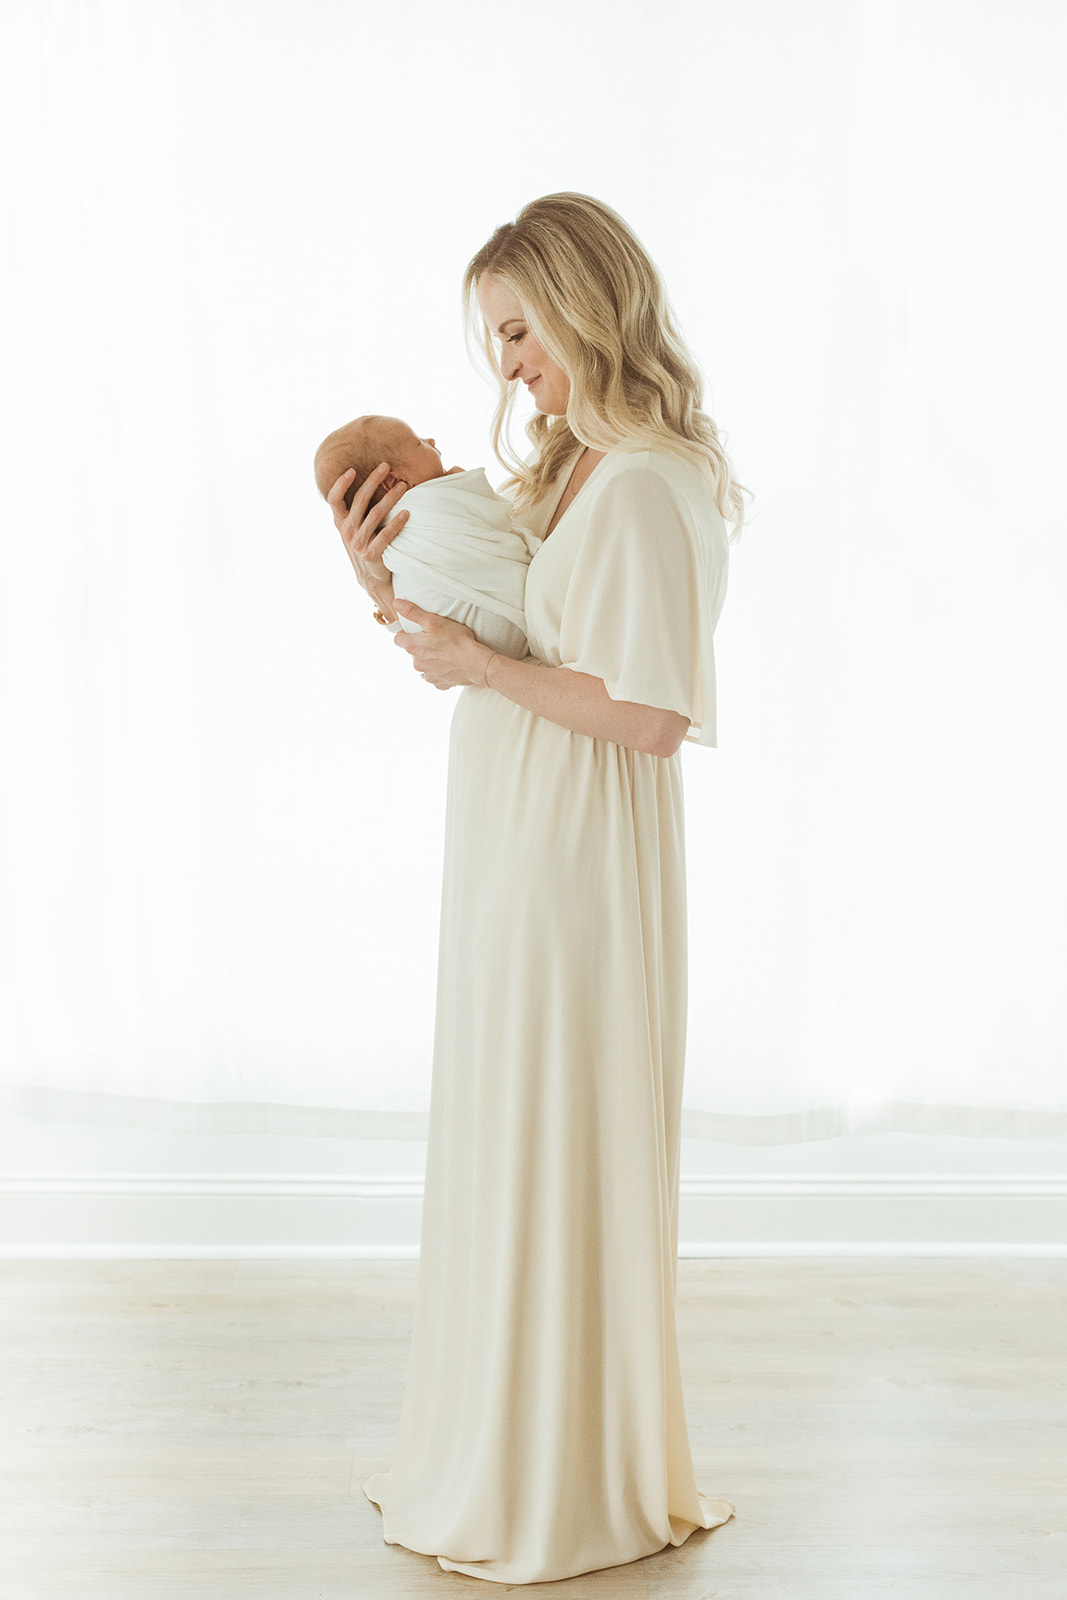 baby Charolette's newborn session in Nashville, Tennessee. photo of mom and baby girl